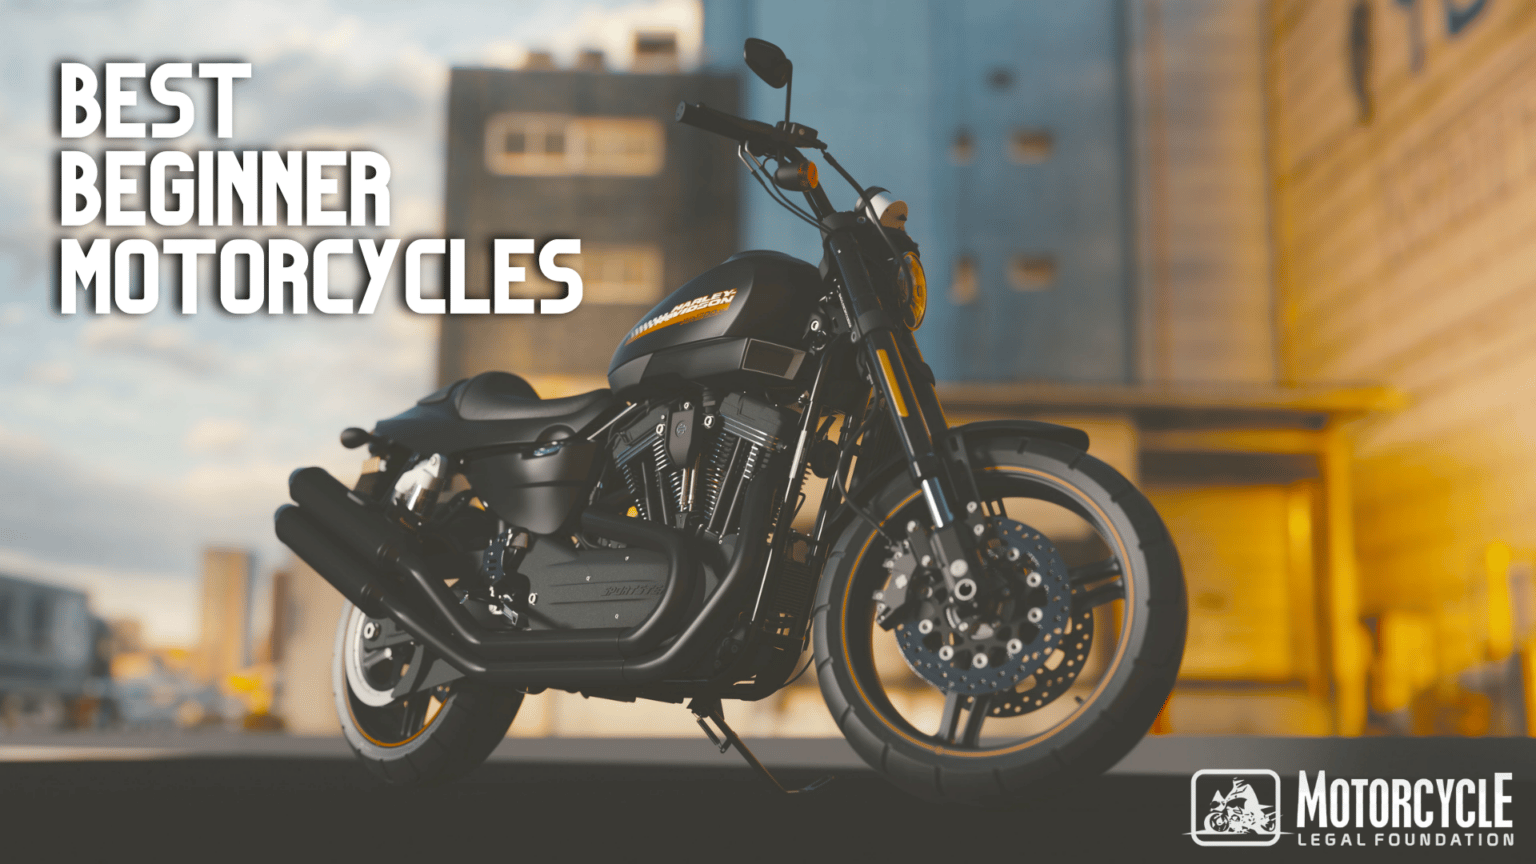 14 Best Beginner Motorcycles for All Types of Riders